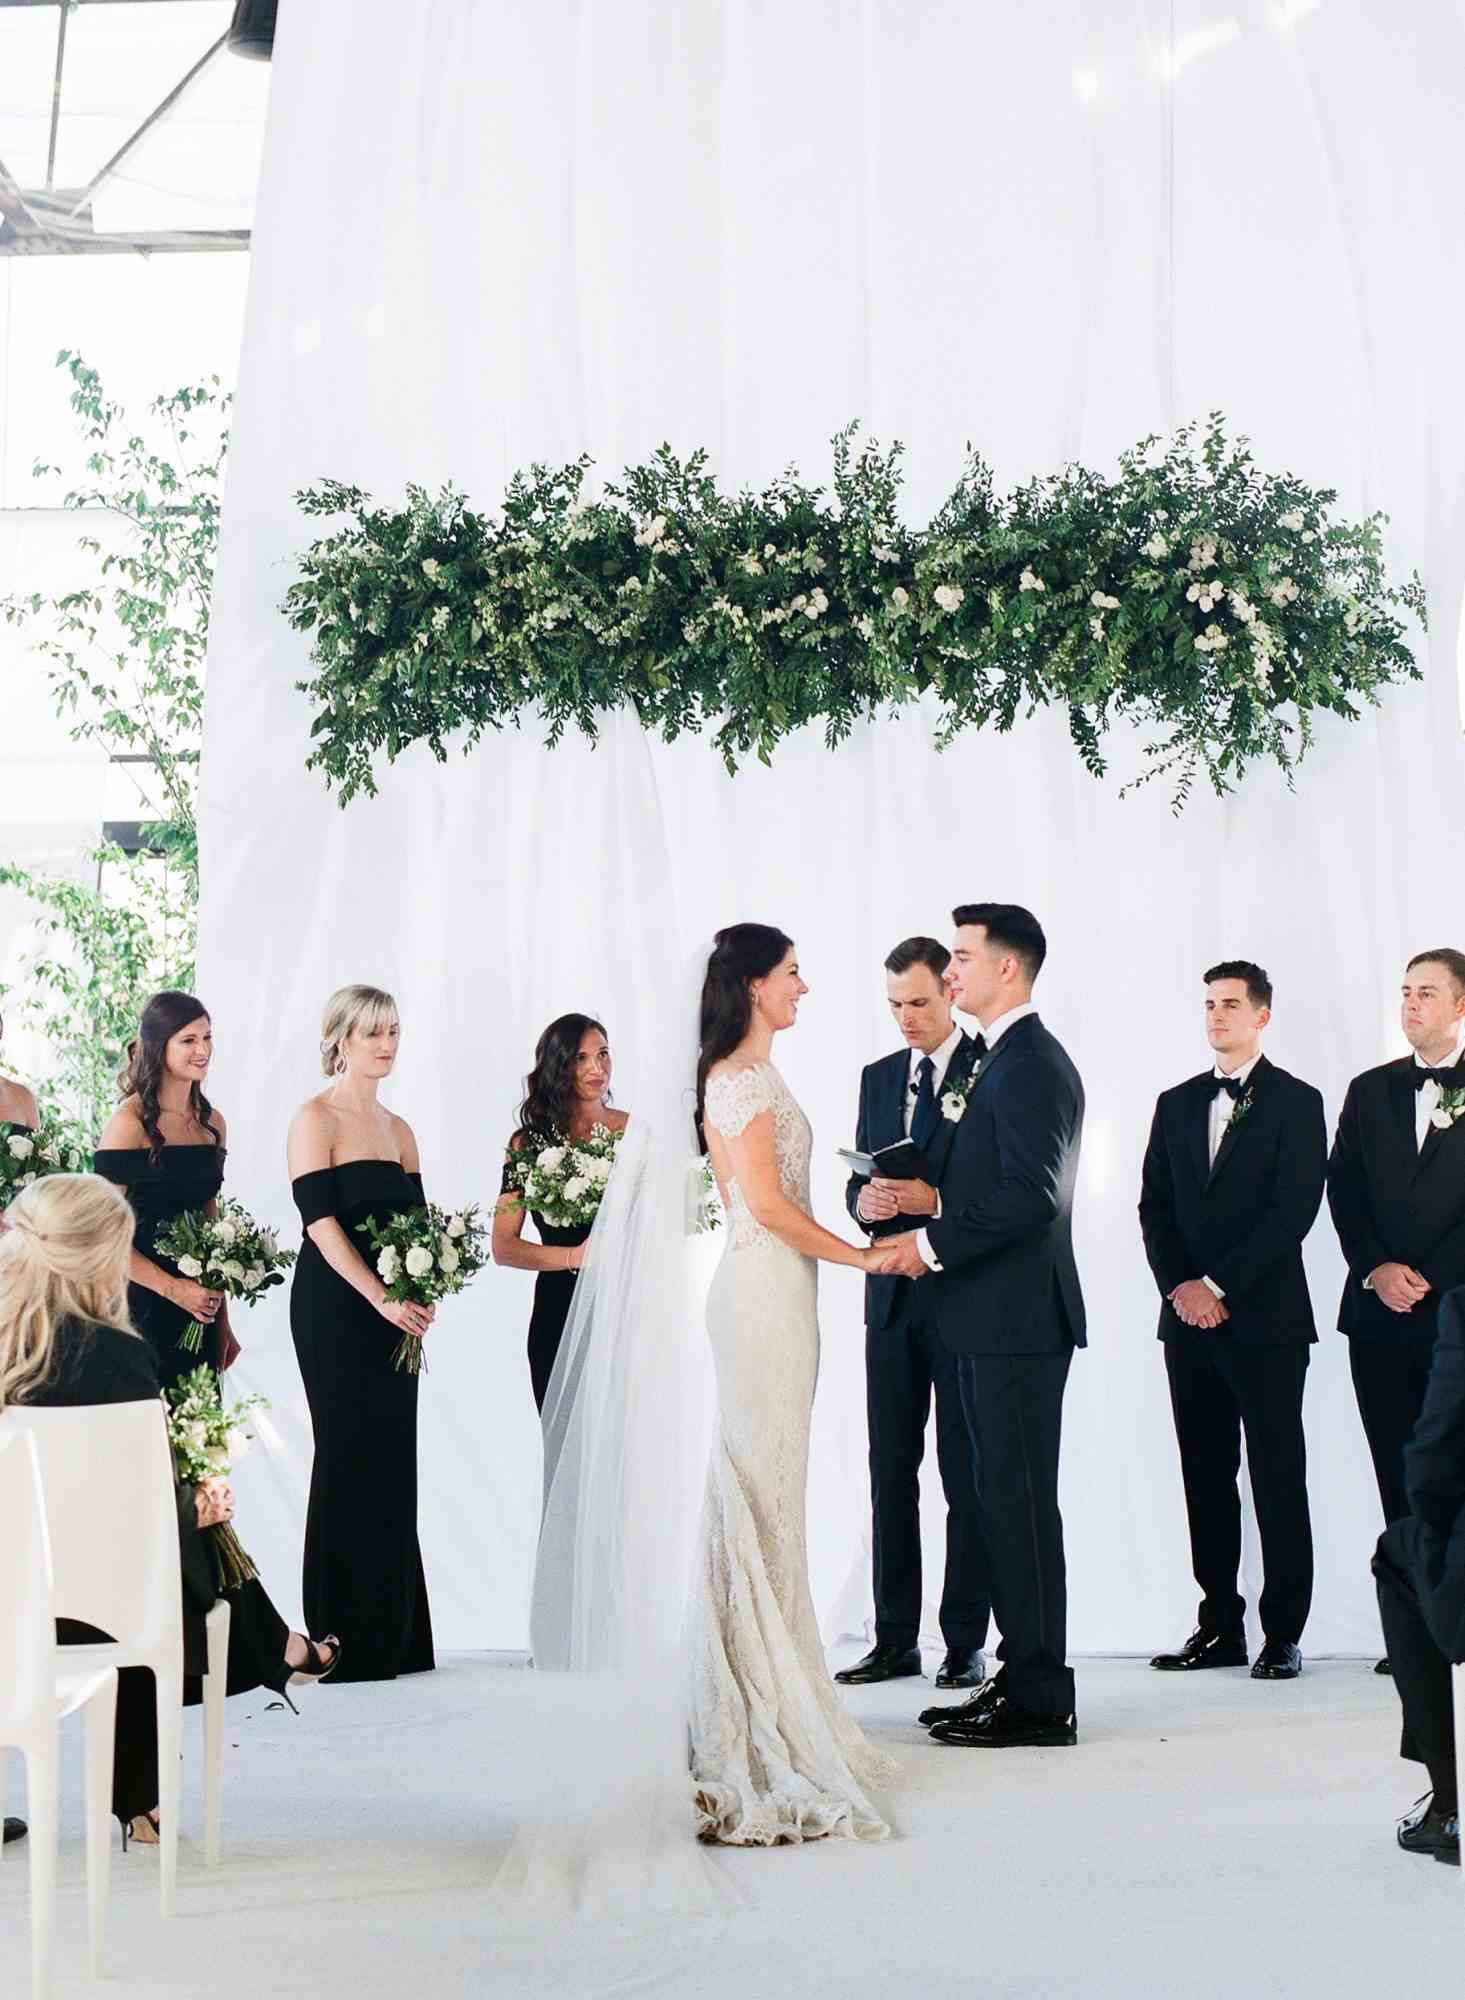 couple at religious wedding ceremony with greenery overhead